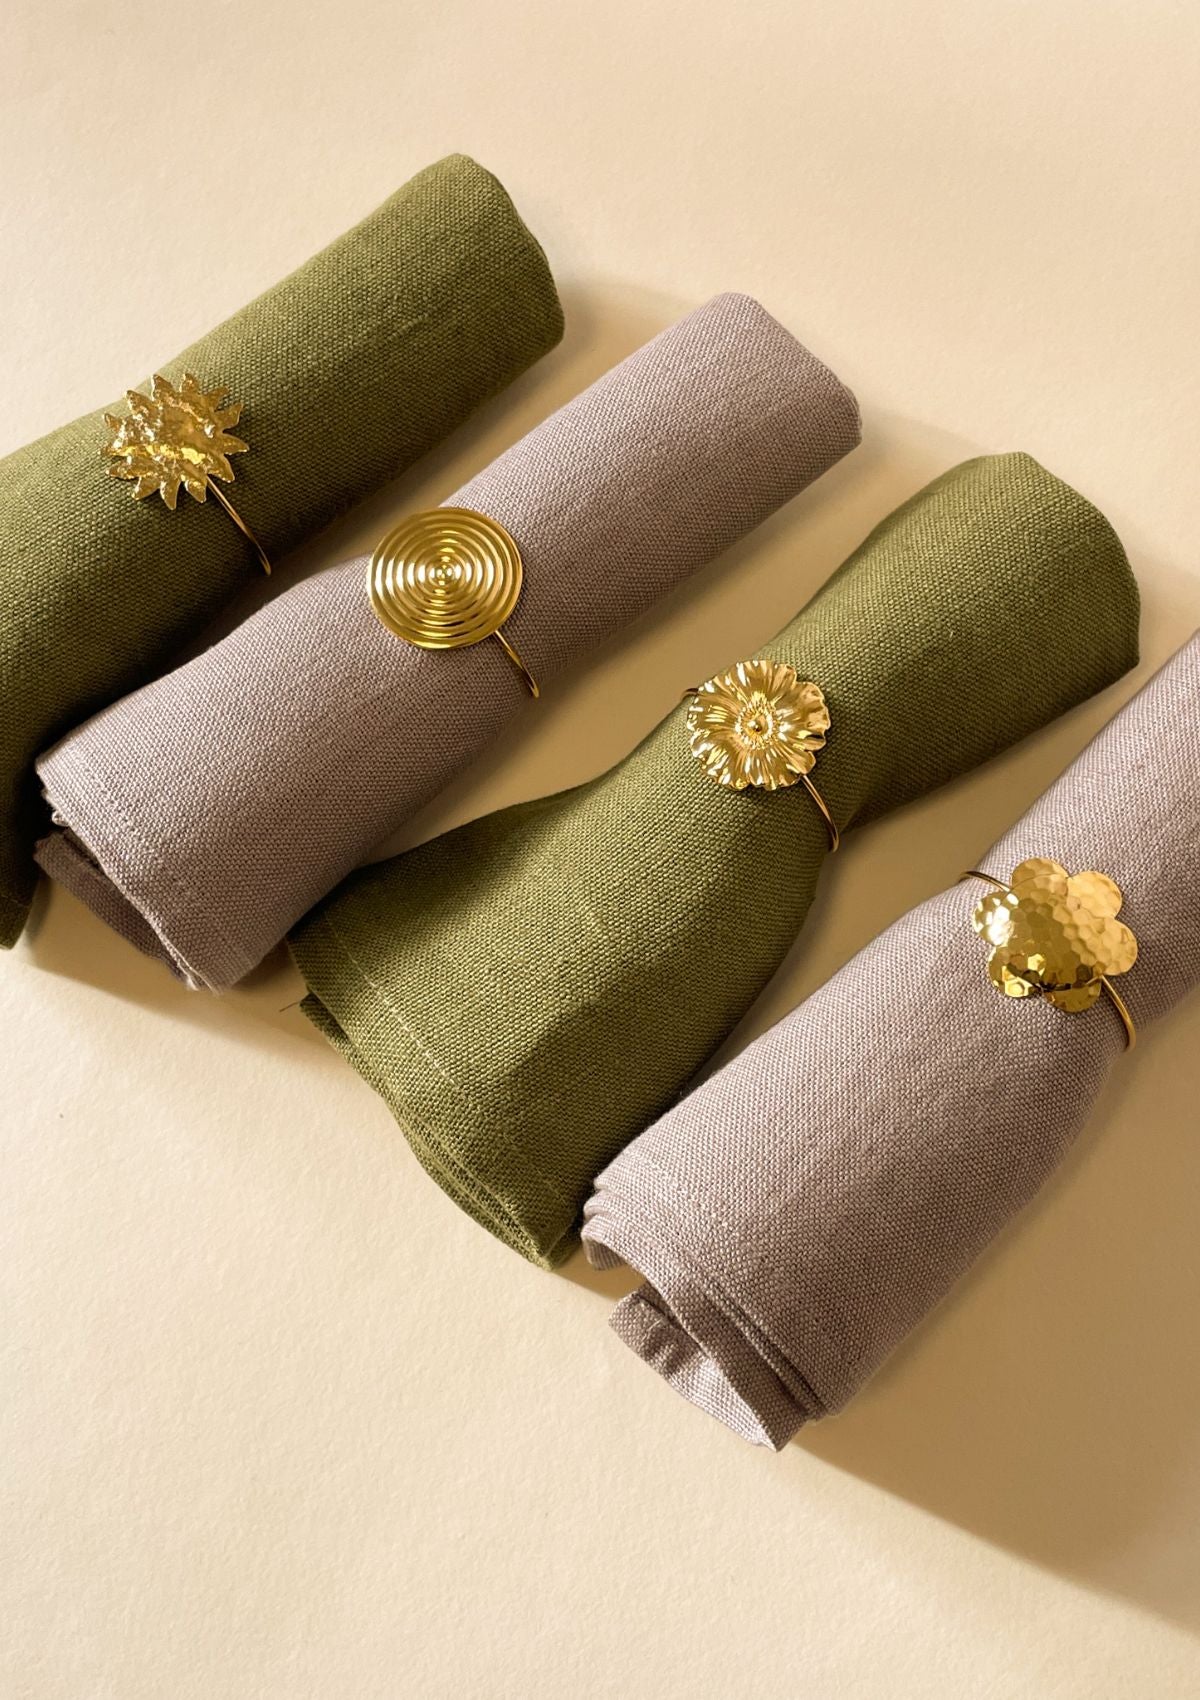 The Buttercup gold jewel napkin ring